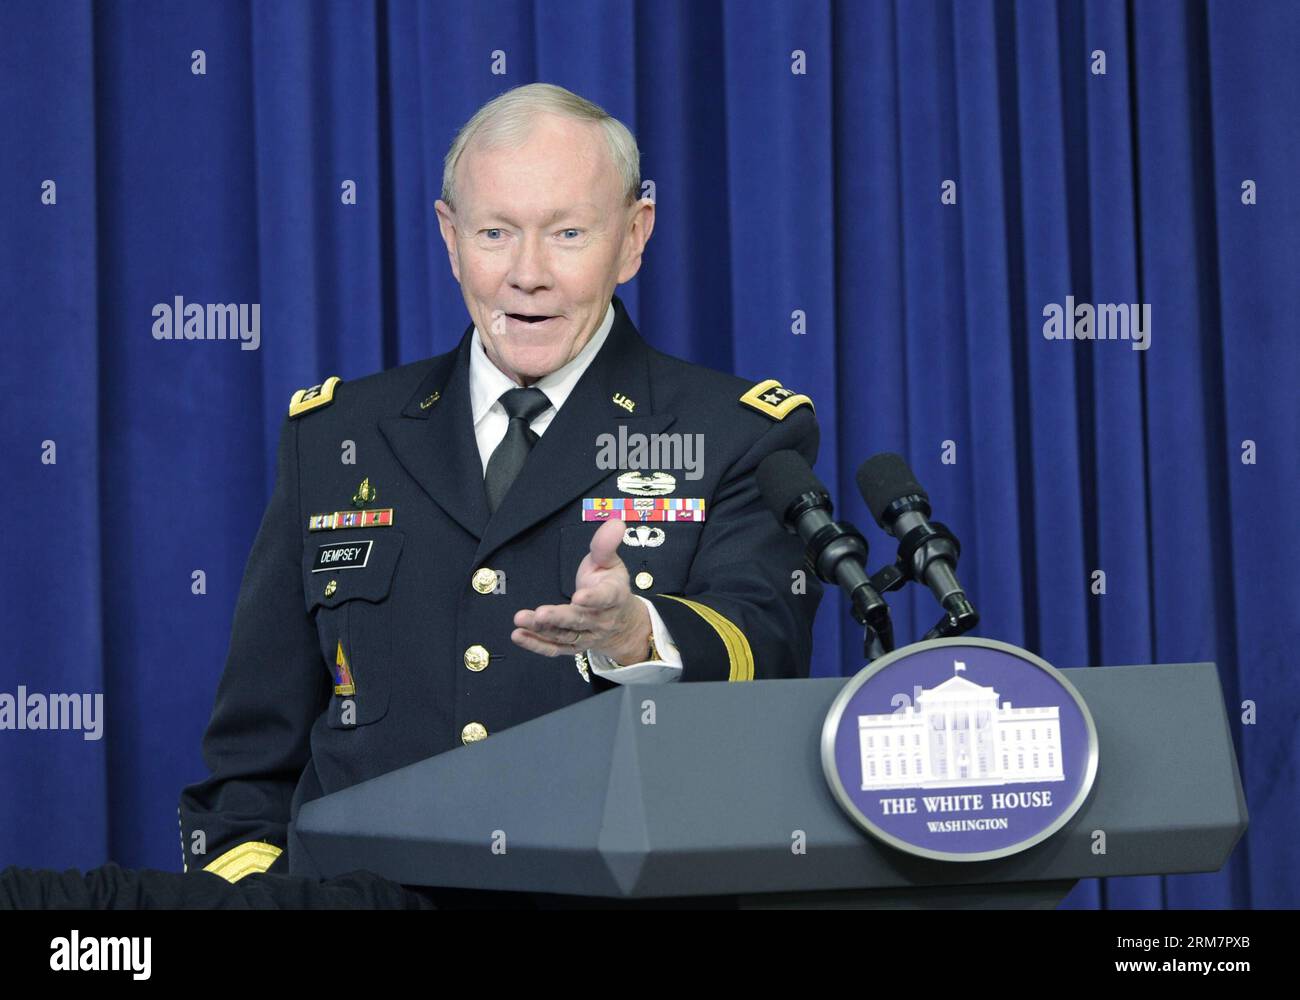 (140312) -- WASHINGTON D.C., March 12, 2014 (Xinhua) -- Chairman of the Joint Chiefs of Staff General Martin Dempsey speaks at a special screening of Disney s movie Muppets Most Wanted at the White House in Washington D.C., capital of the United States, March 12, 2014. As part of the Joining Forces initiative, U.S. First Lady Michelle Obama delivered remarks to children of military families during the special screening. (Xinhua/Bao Dandan) US-WASHINGTON-FIRST LADY-DISNEY-SCREENING PUBLICATIONxNOTxINxCHN   Washington D C March 12 2014 XINHUA Chairman of The Joint CHIEFS of Staff General Martin Stock Photo